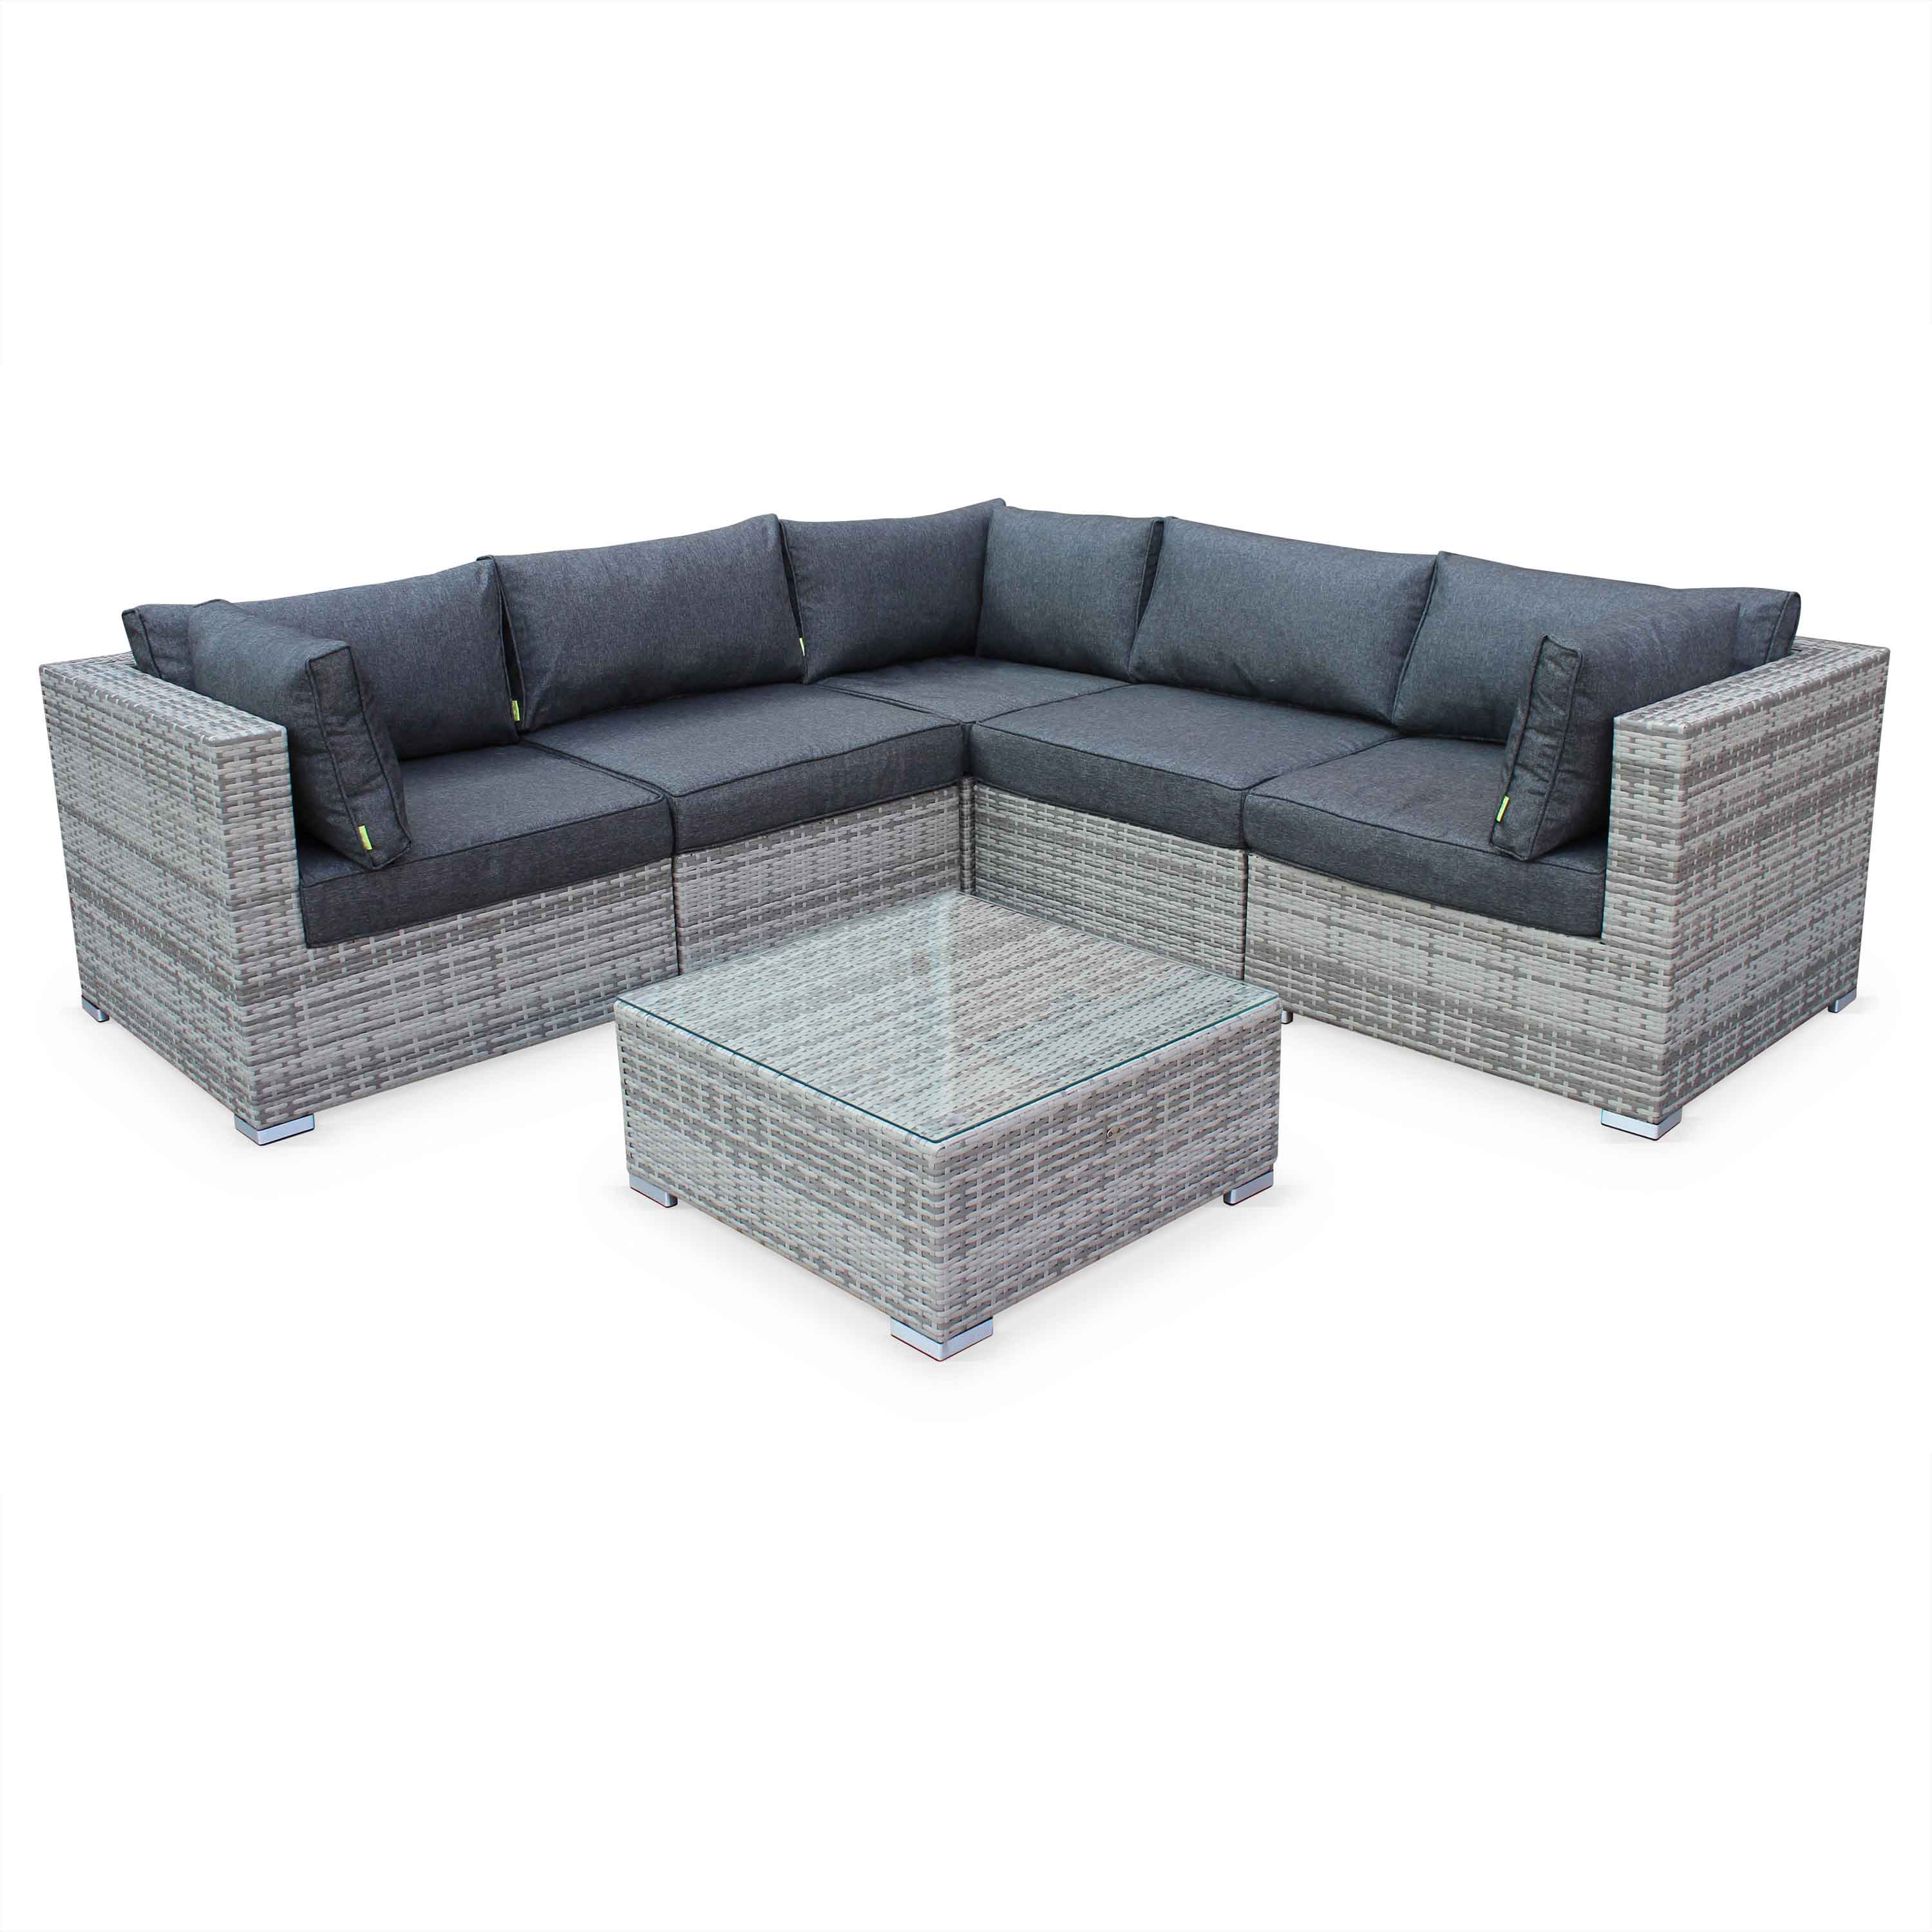 NAPOLI 5 Seater Outdoor Lounge set Grey Complete Set